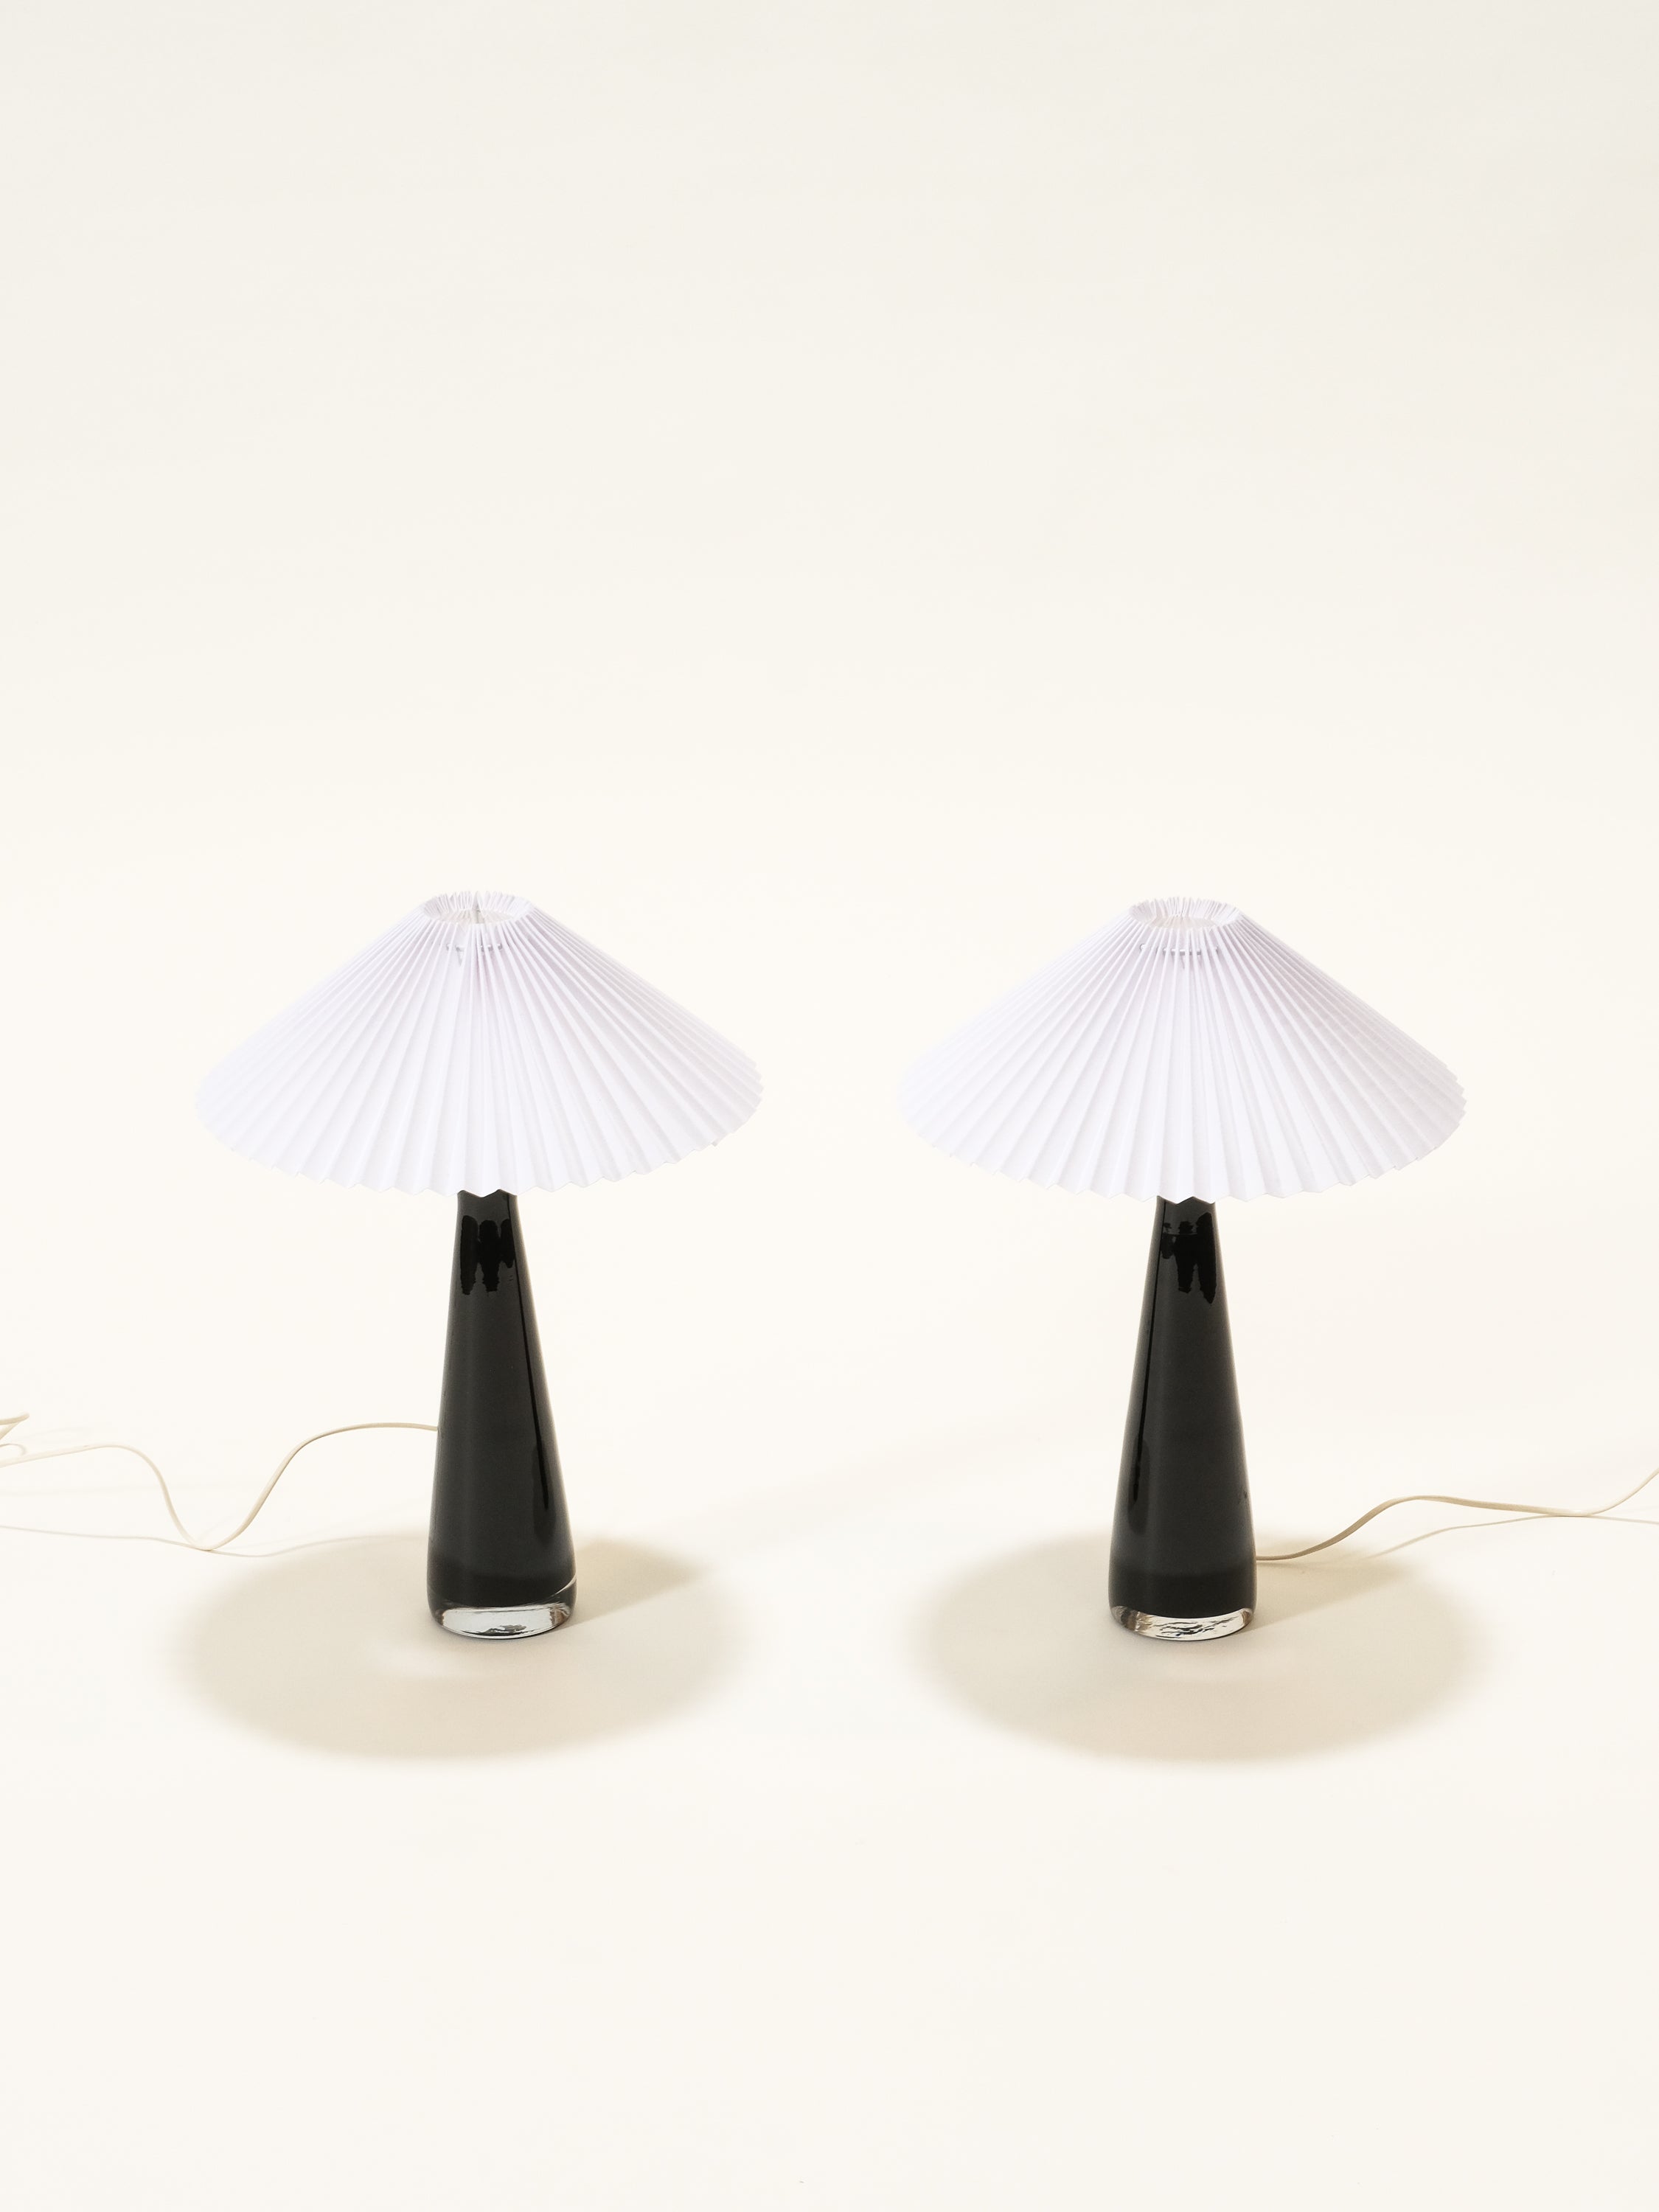 Pair of Glass Table Lamps, Sweden, 1960s